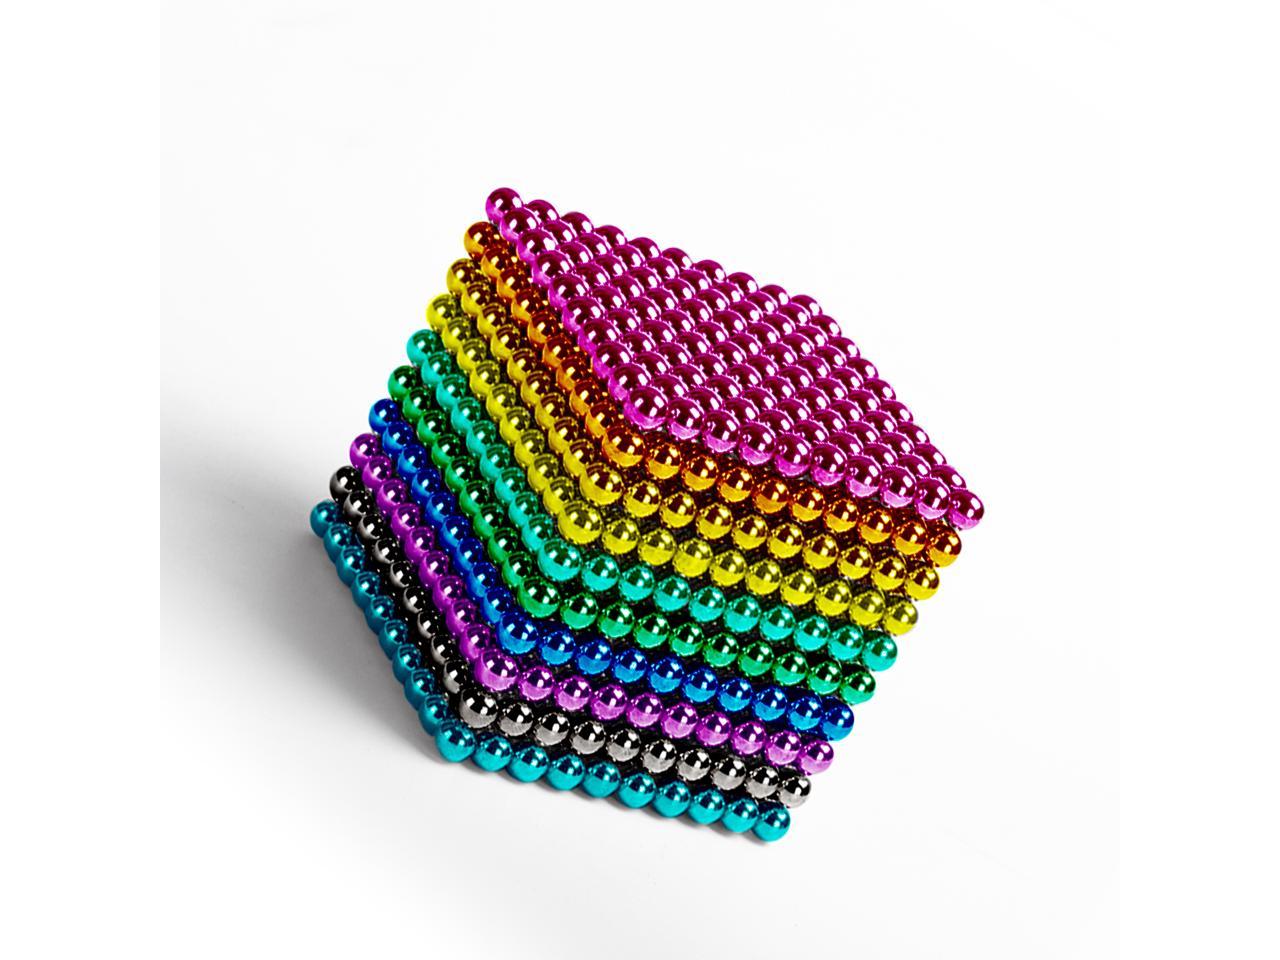 Multicolor Magnetic Balls 216pcs 5mm Magnet Fidget Toy and Stress Relief Toys for Adults Building Cube Spheres Sensory 3D Puzzle Creative Relaxing Desk Hand Magnet Game Gadget 